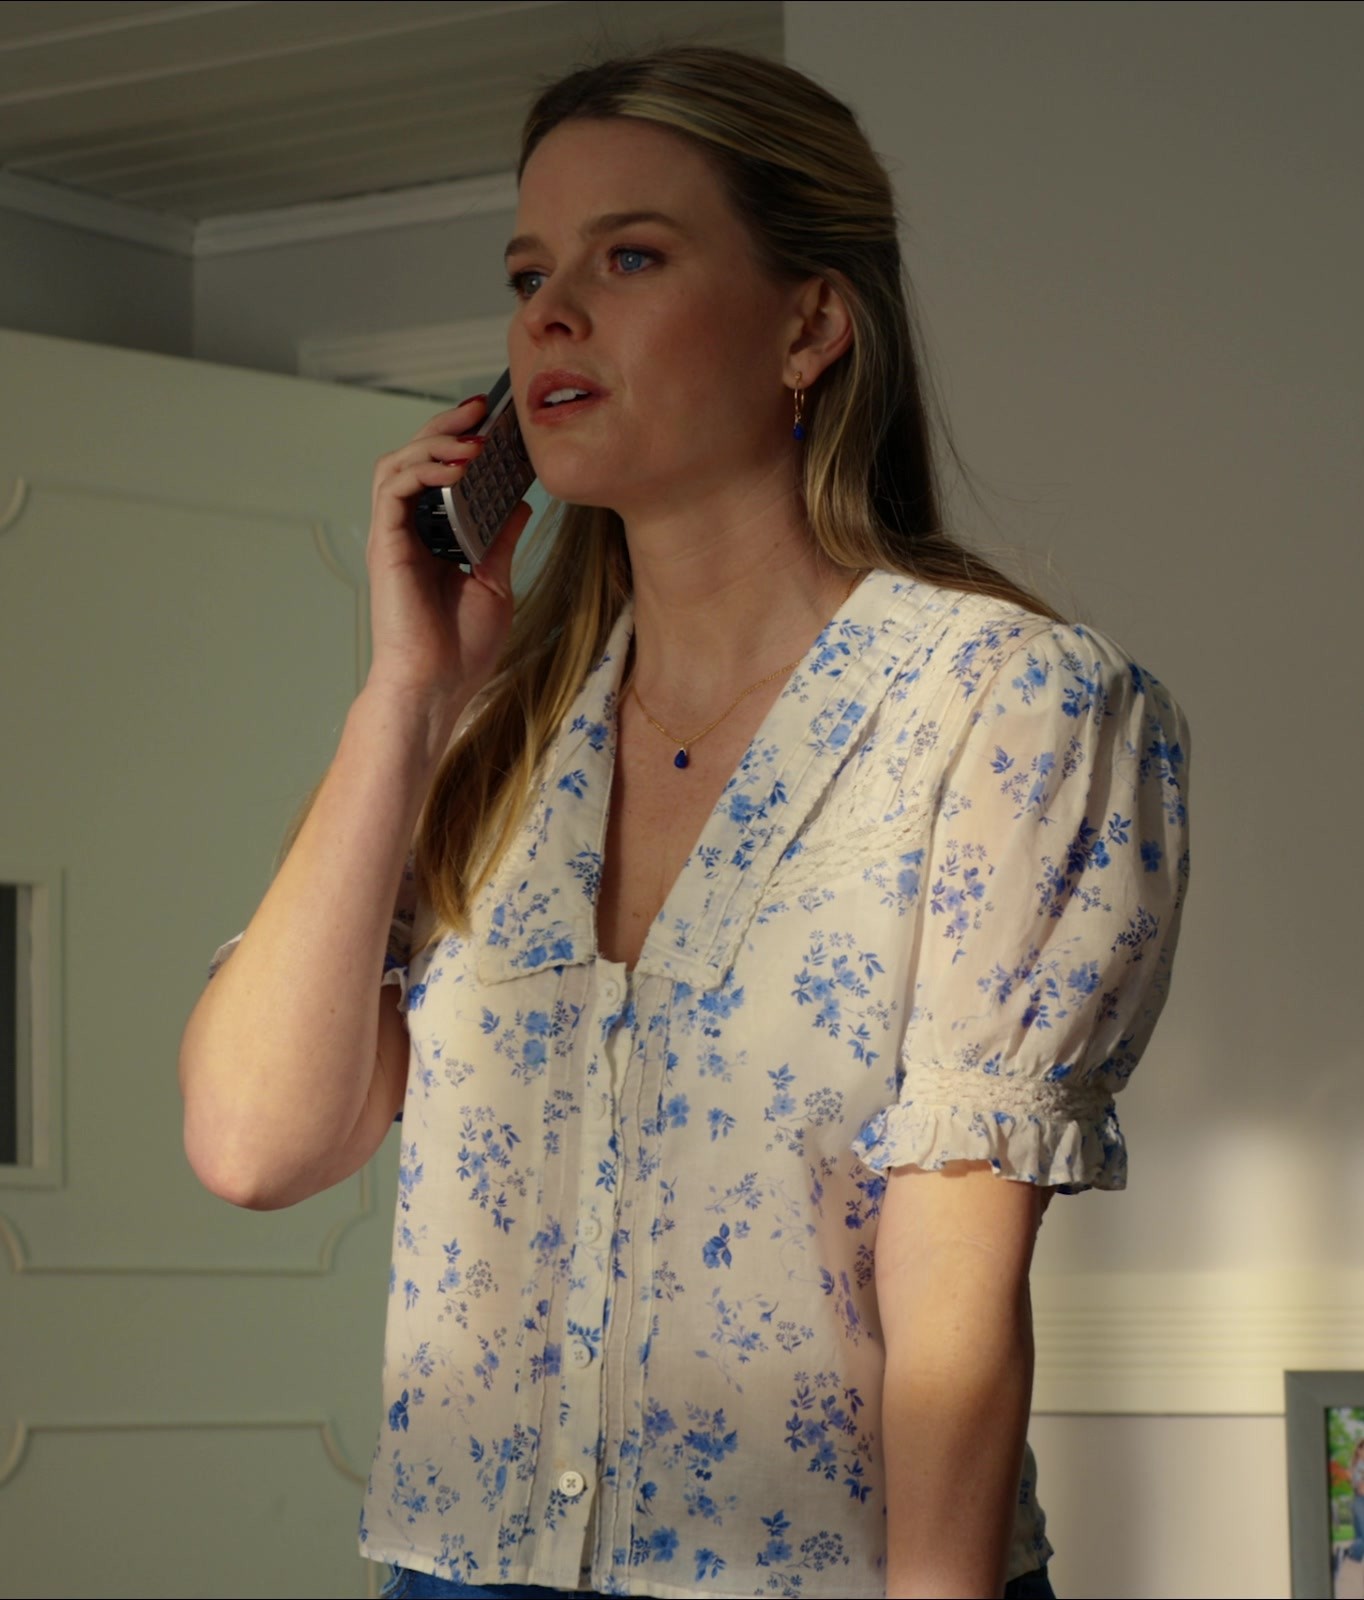 Worn on Freelance (2023) Movie - Light Beige Floral Print Short-Sleeve Blouse Worn by Alice Eve as Jenny Pettits